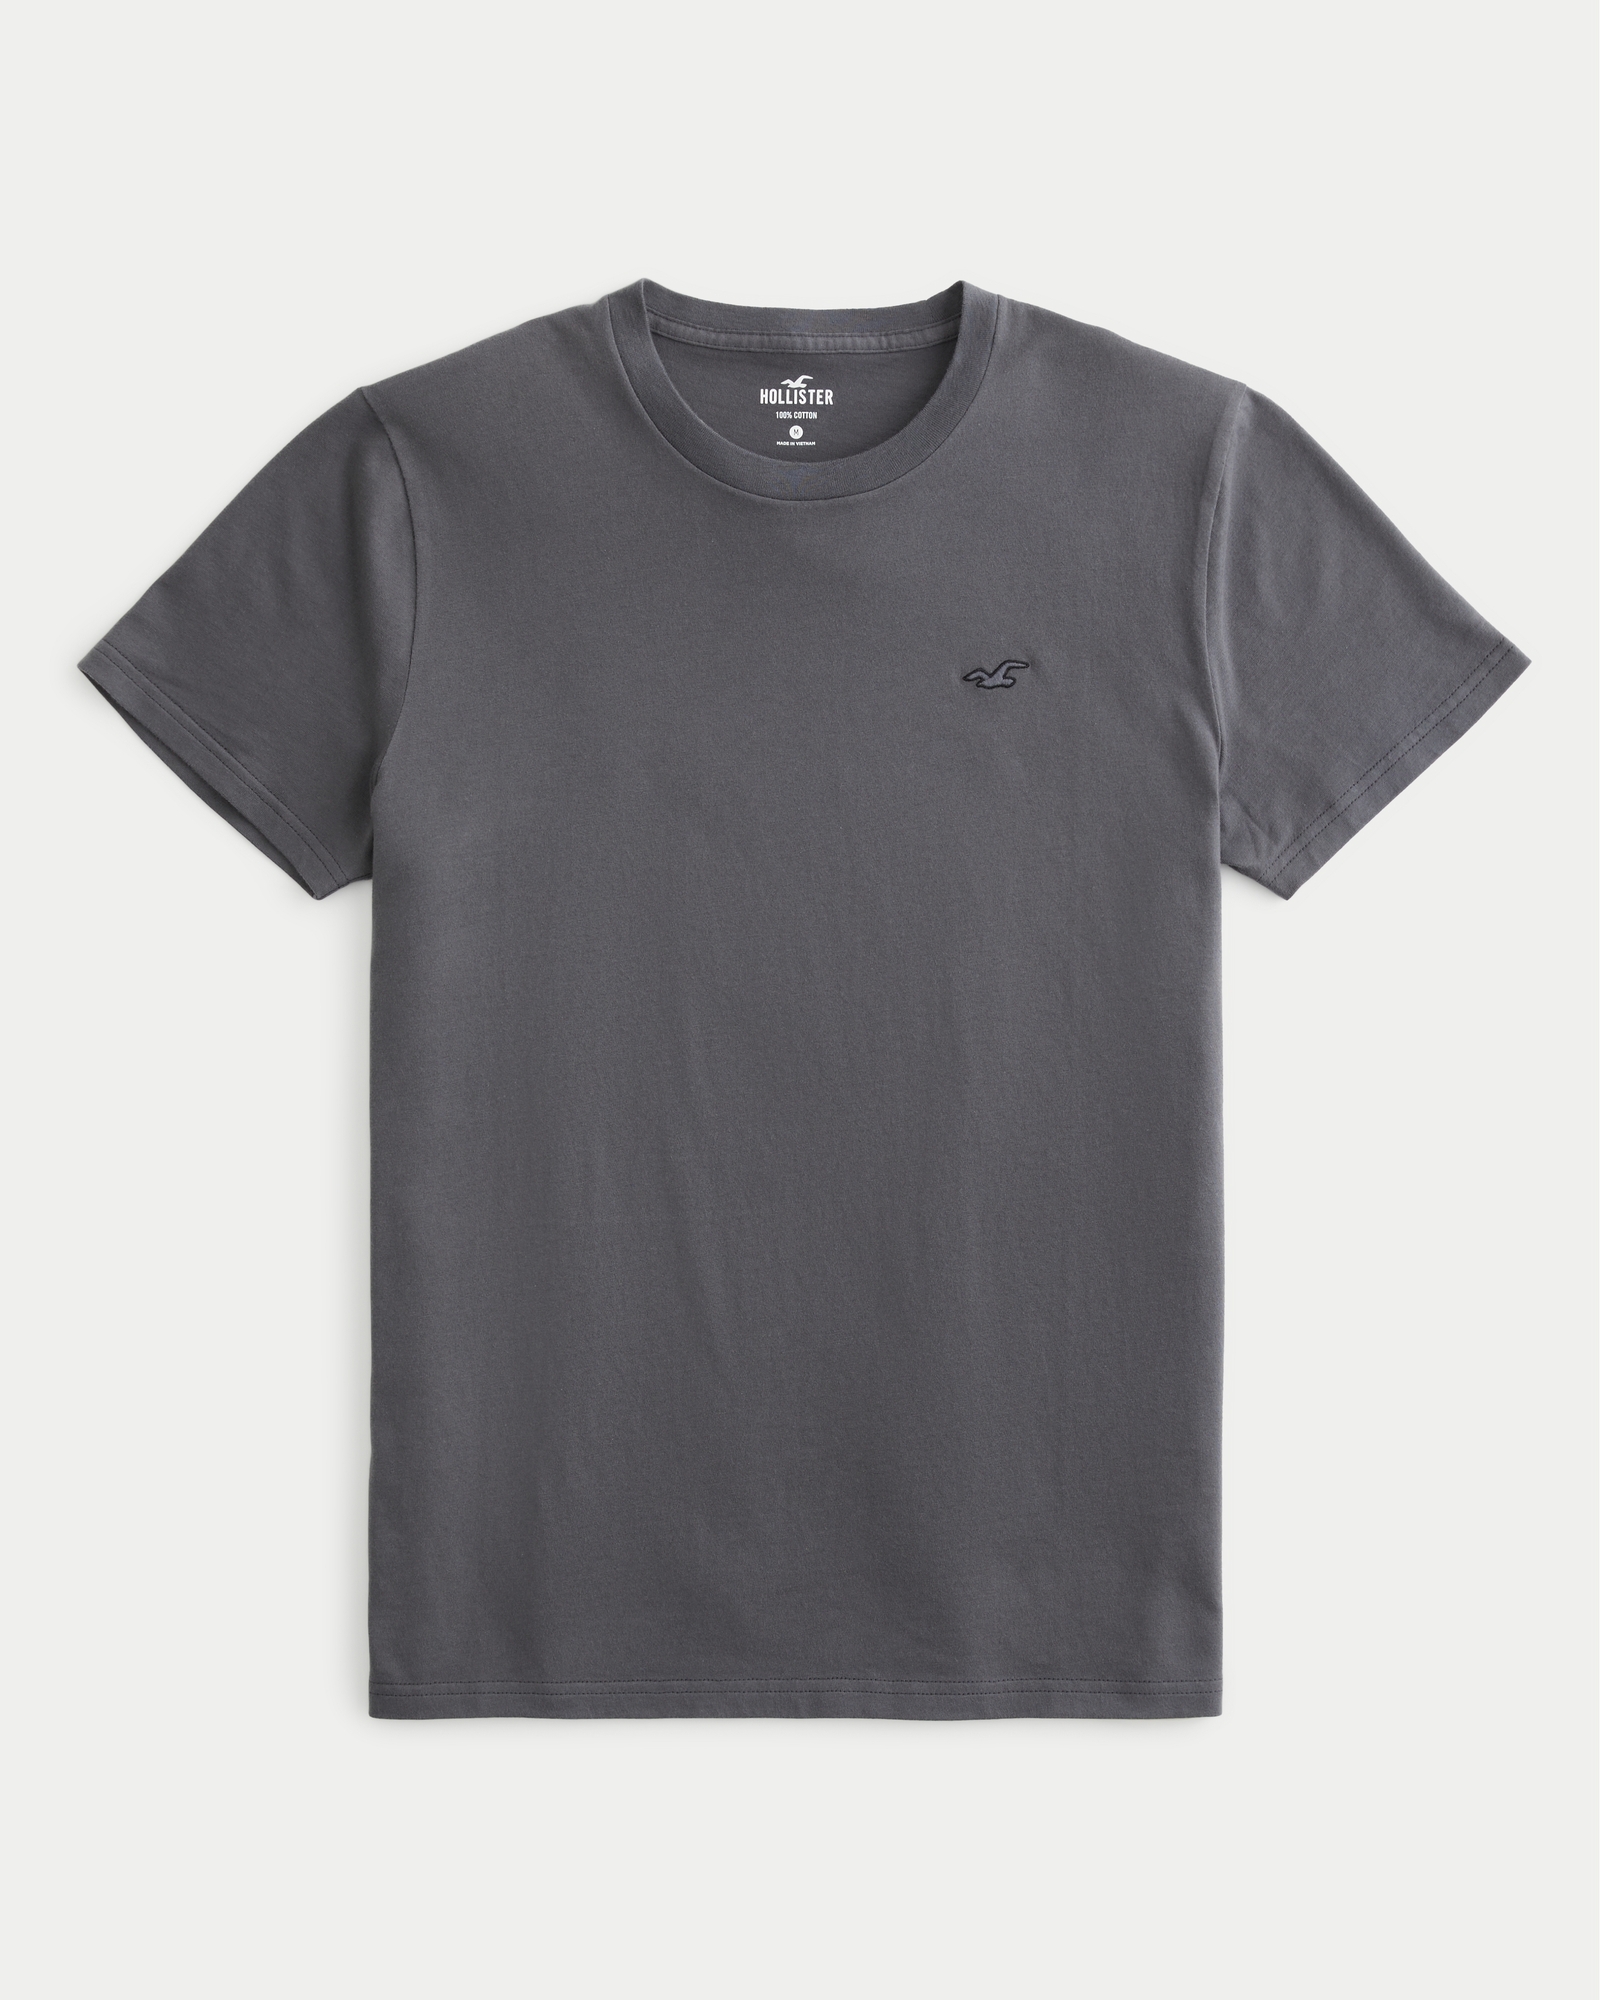 Hollister icon logo t-shirt in mint green